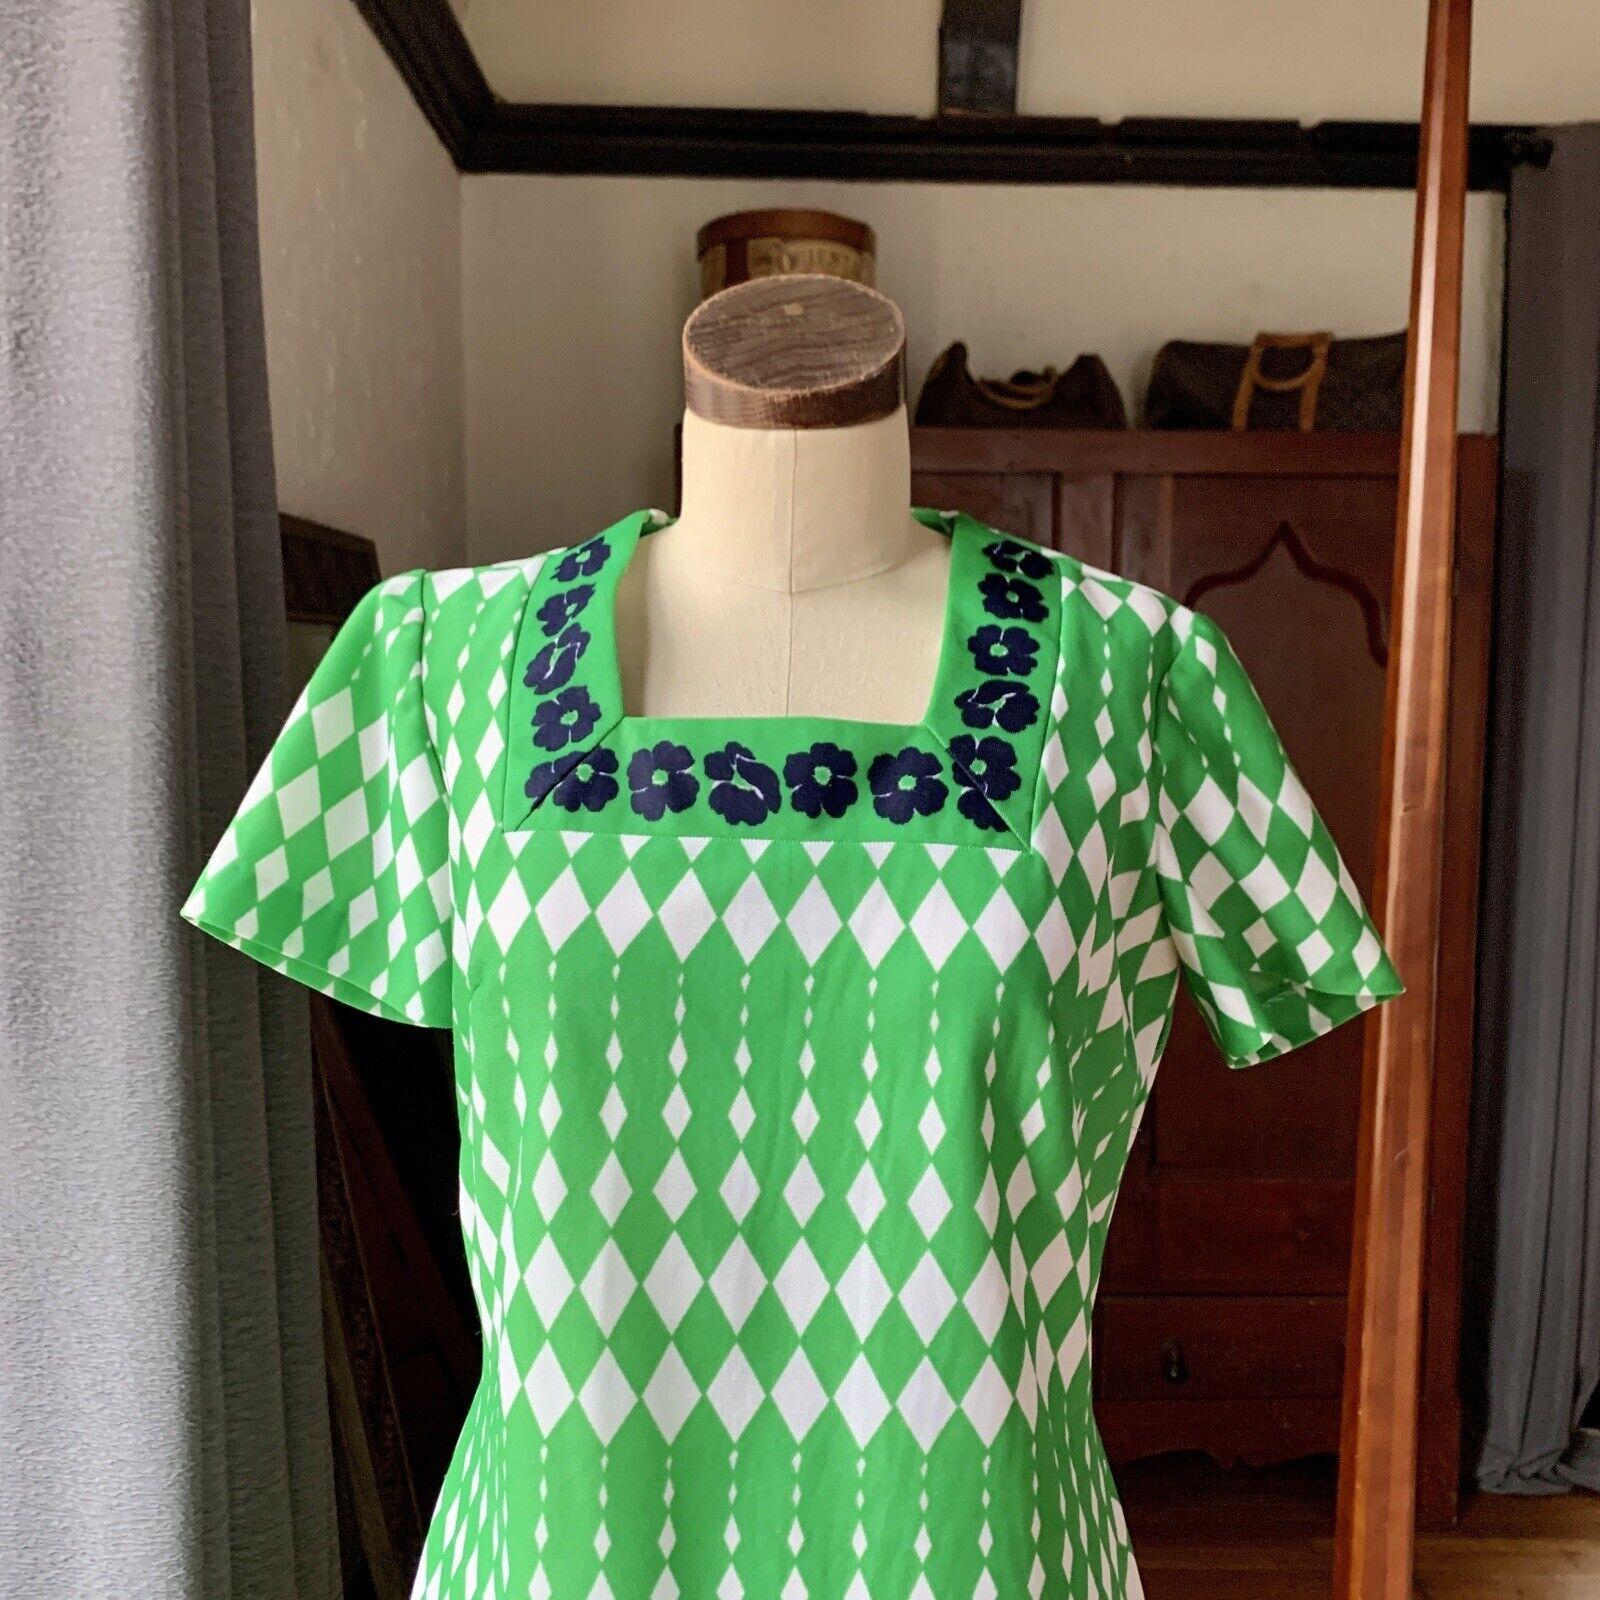 Vintage Mod Green Dress, Diamond and Floral Print, Polyester, Metal Zipper on Back, Darted, Short Sleeve, Calf Length, Great for Spring!

Measurements Laying Flat:
Bust 18